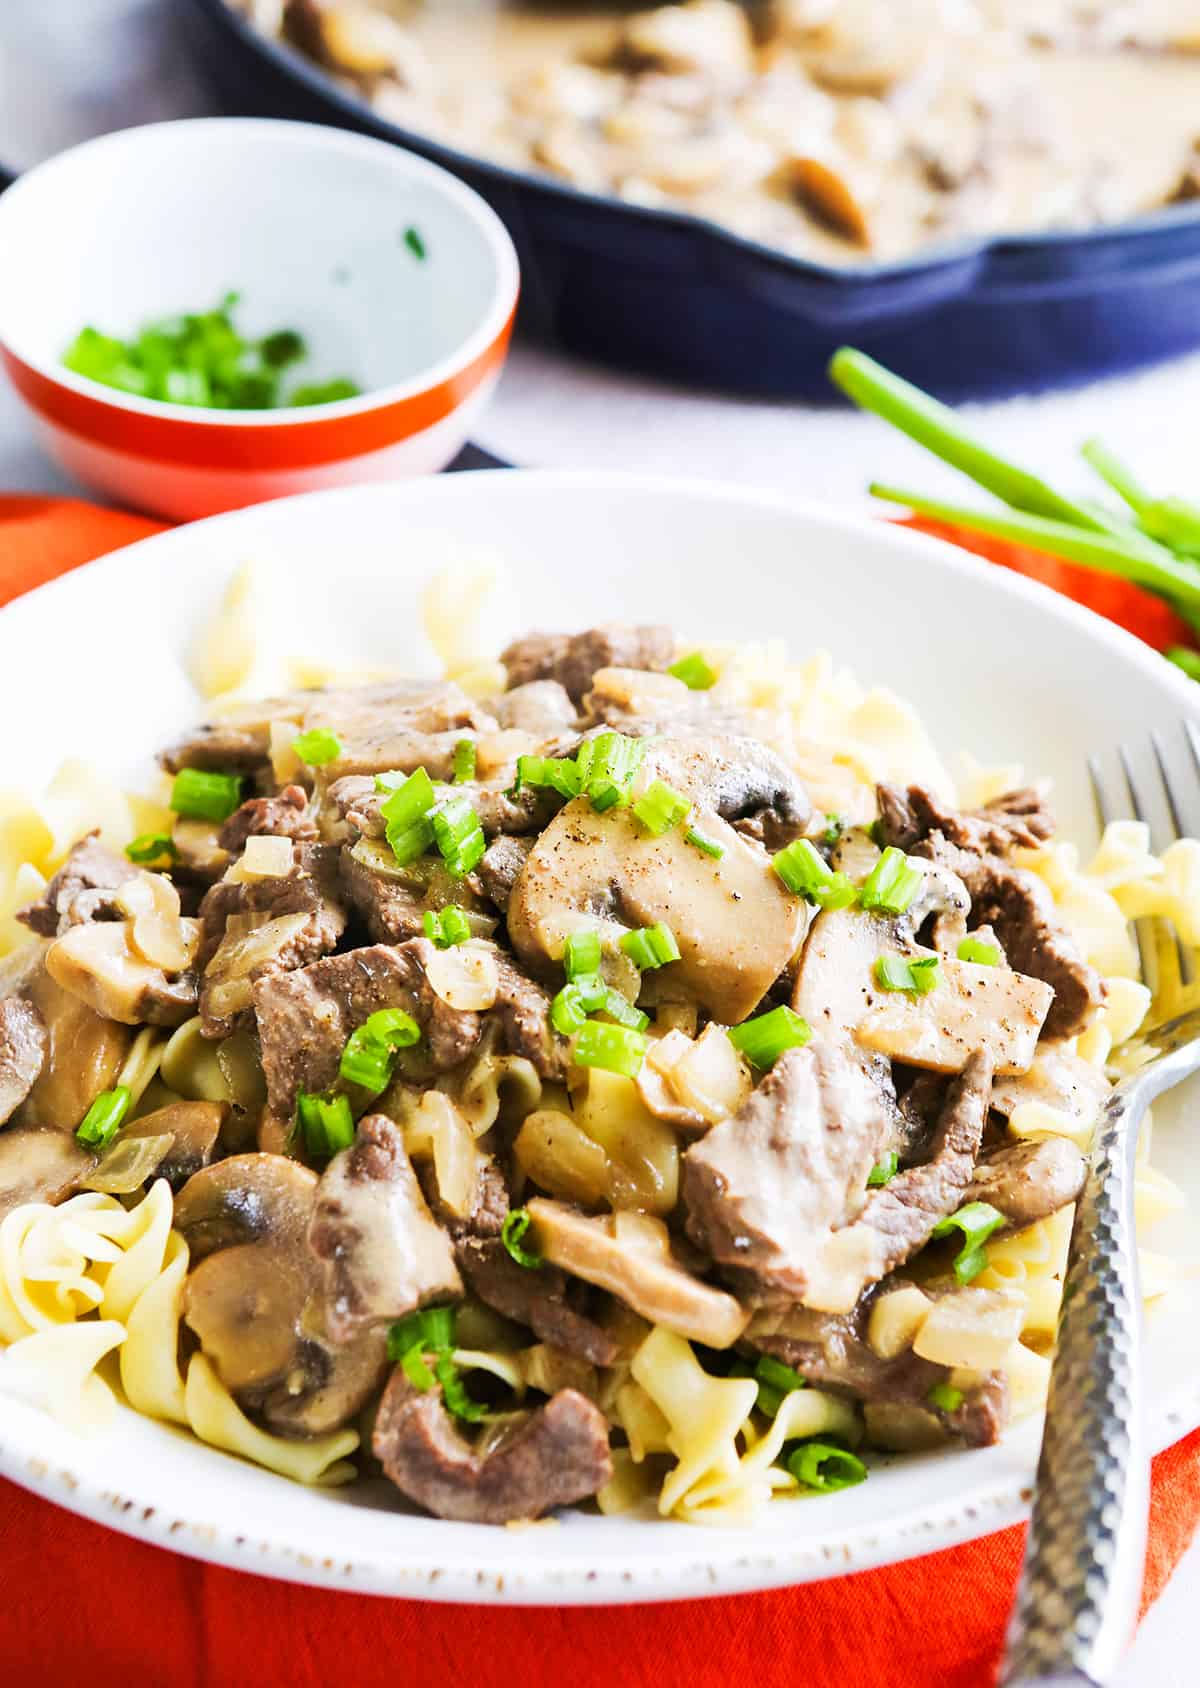 Plate filled with creamy beef stroganoff and topped with green onion slices.